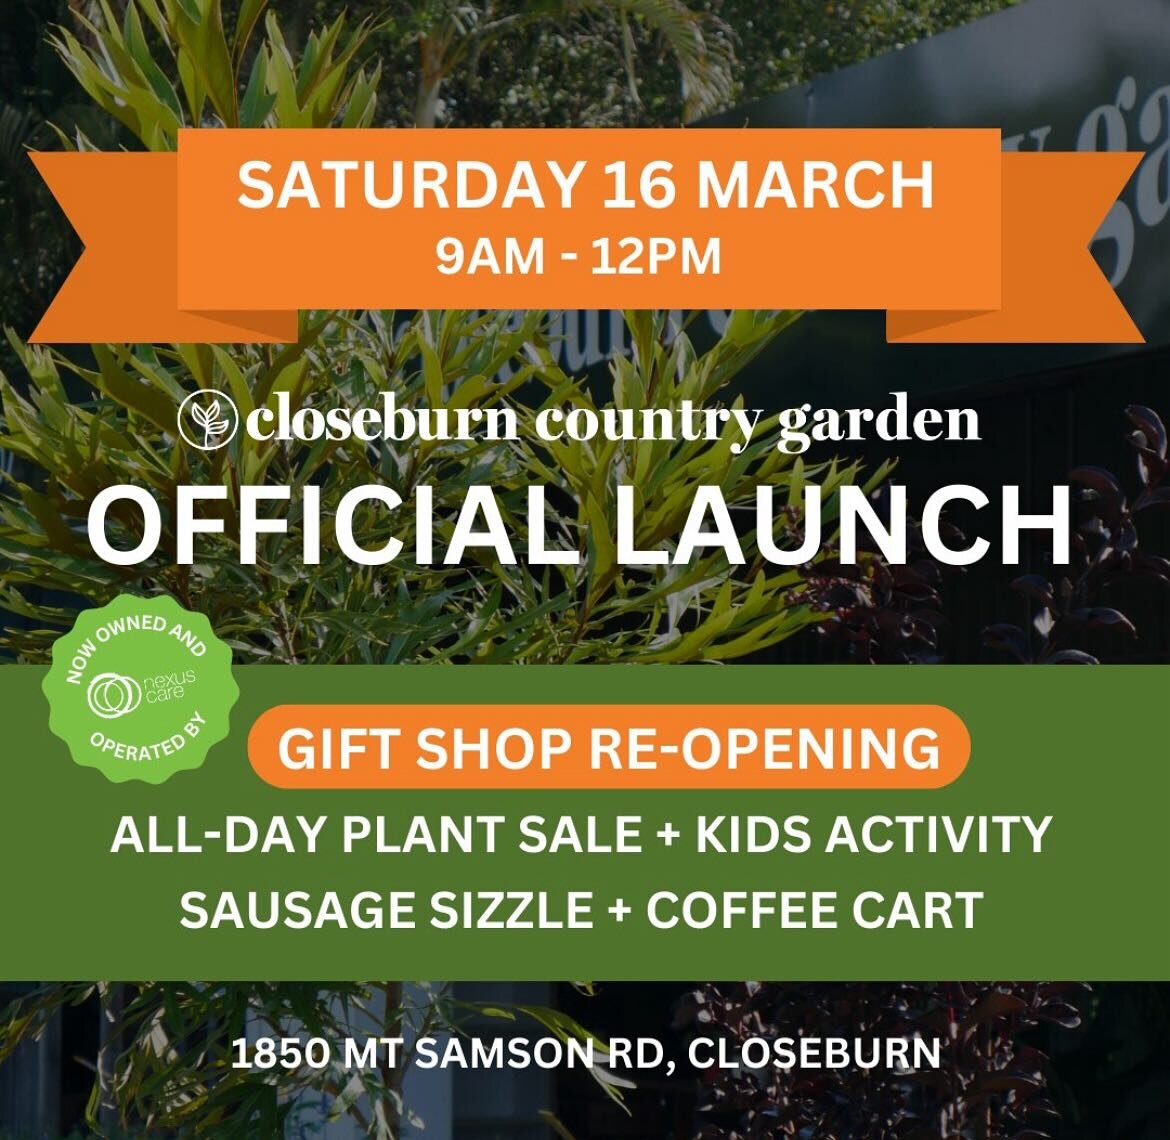 In case you haven&rsquo;t heard yet, we are thrilled to announce our official launch of Closeburn Country Garden next weekend, as an initiative of Nexus Care! 🌱

You&rsquo;re invited to come and check out the hard work and changes that have been hap